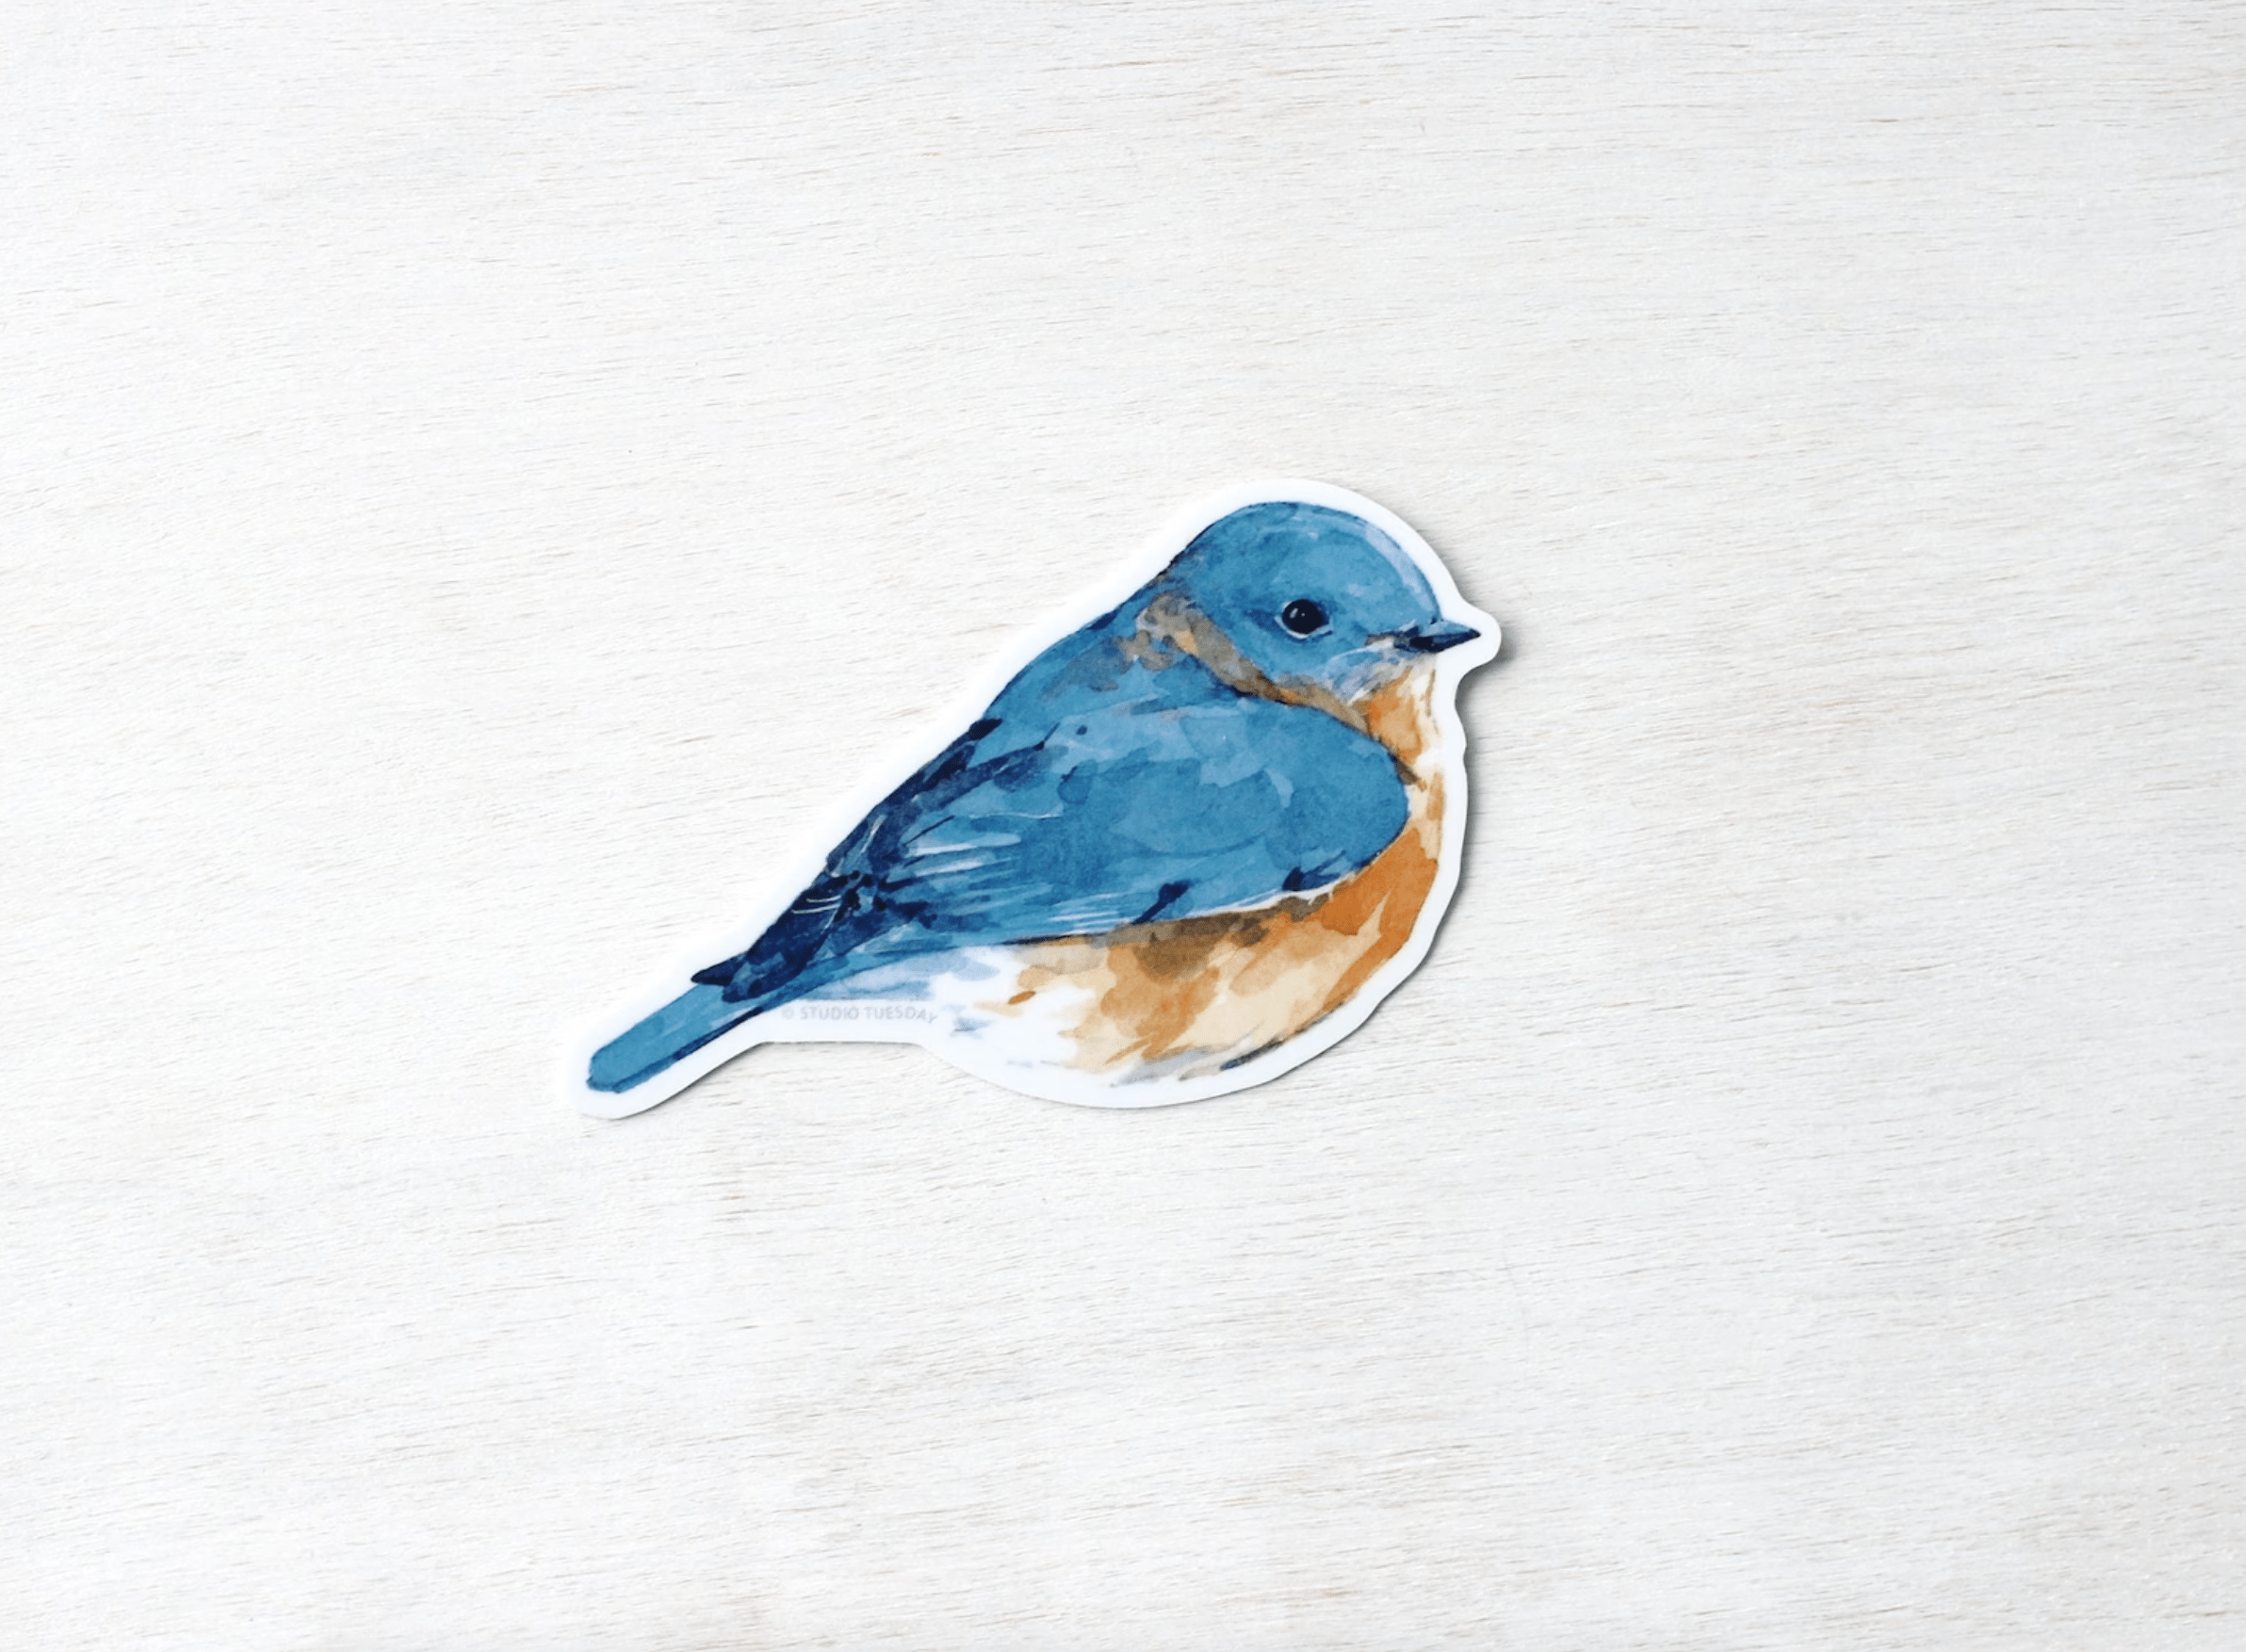 renee's art blog — some of the new bird stickers that are now in my